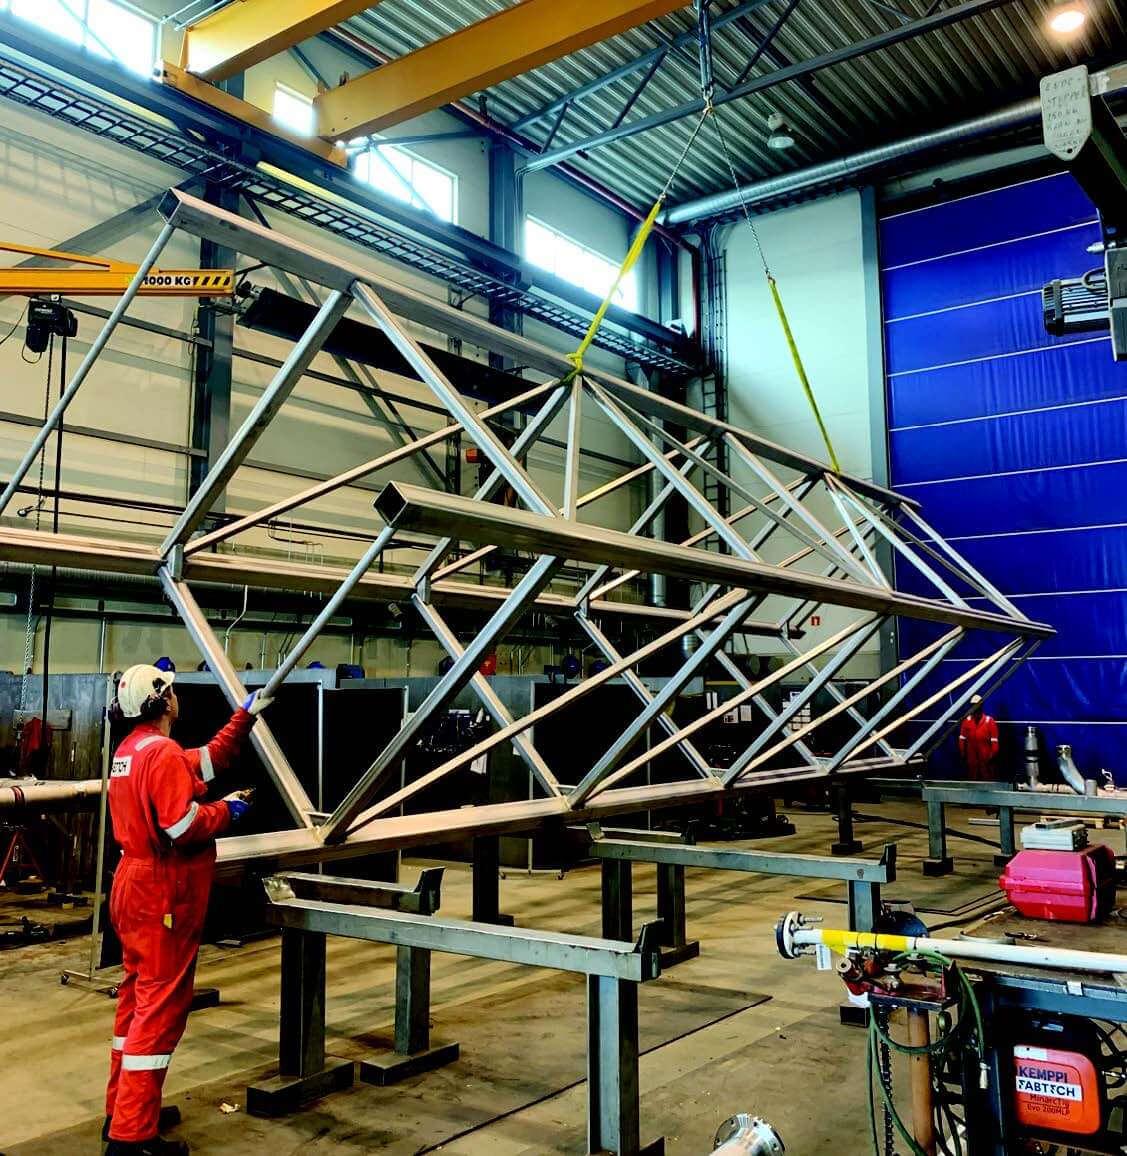 The lightweight lean duplex bridge resulted in reduced costs for handling, fabrication, welding and logistics and material compared to carbon steel structures.